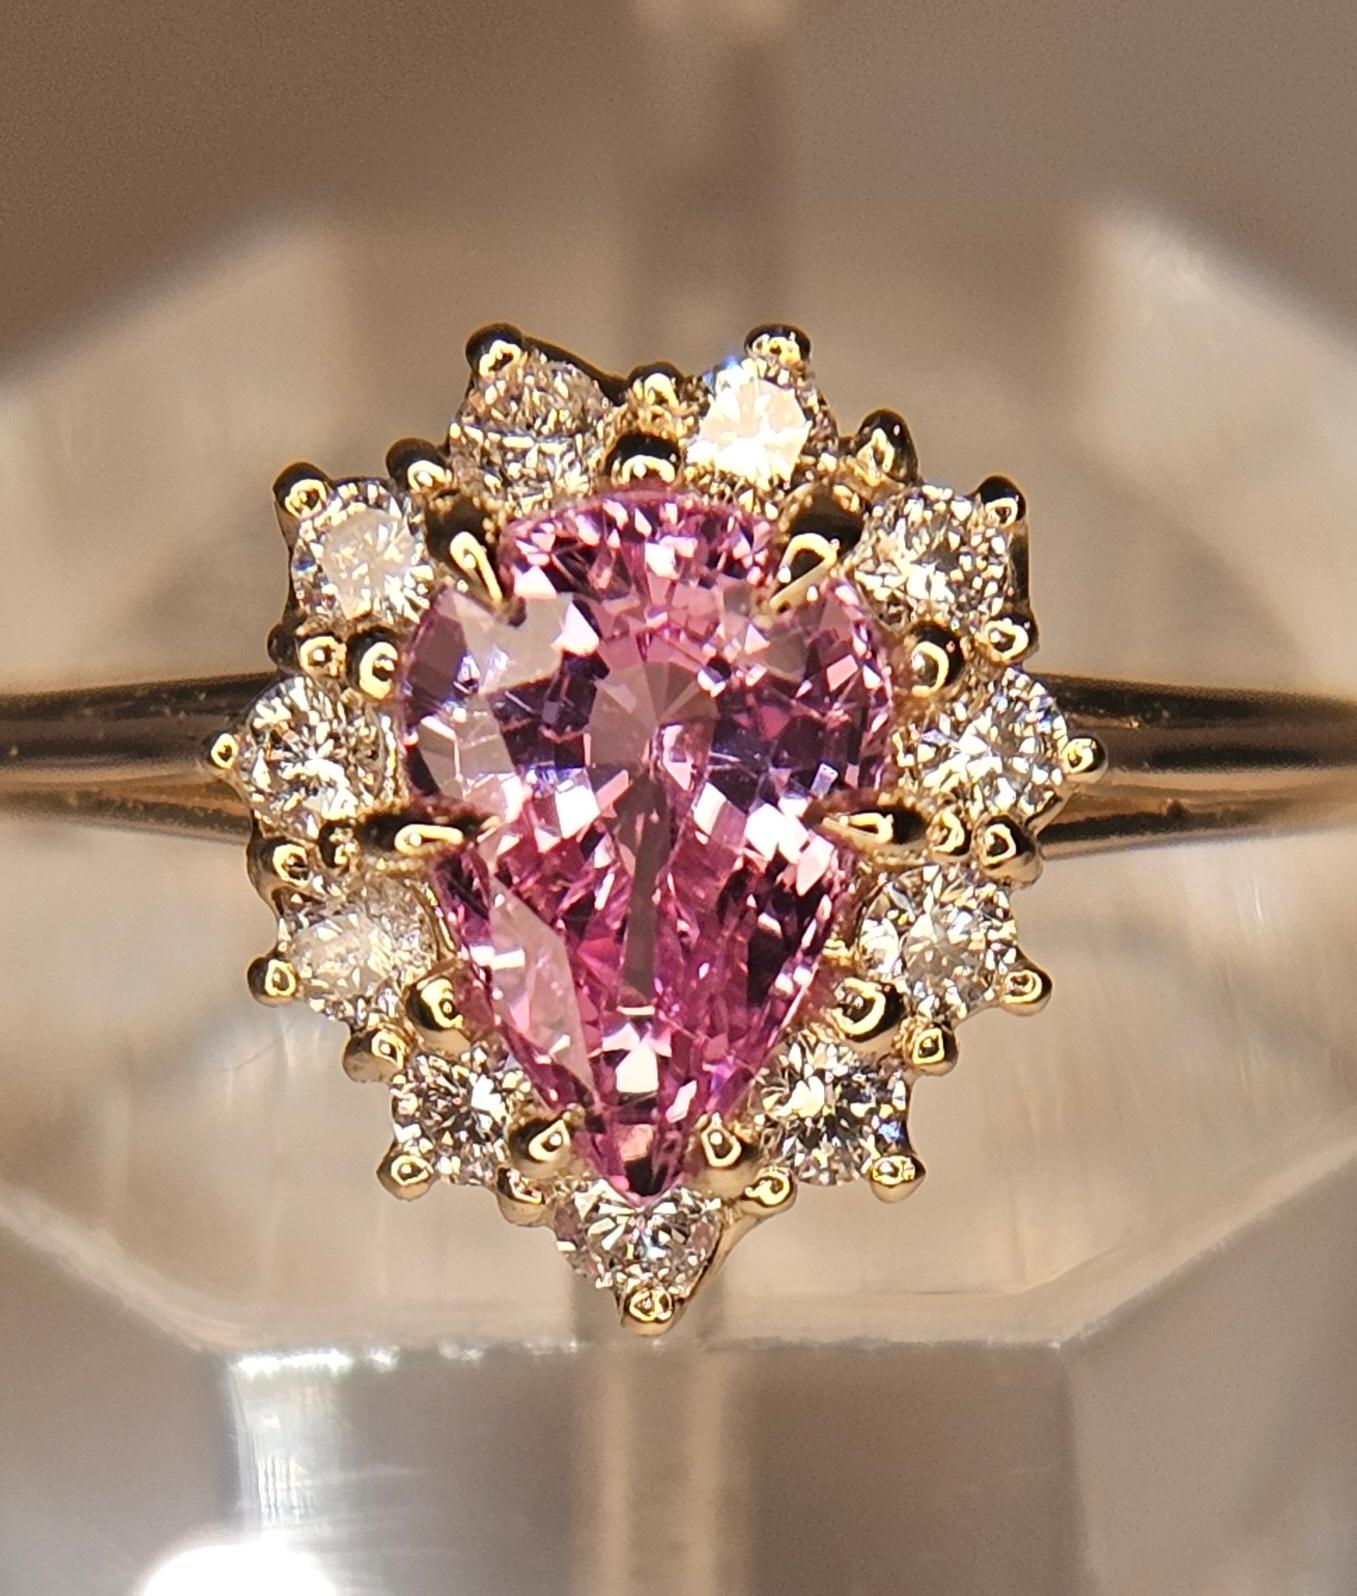 New Cert 1.37 ct Unheated Natural Pink Sapphire Diamond Ring in 14k Gold For Sale 5